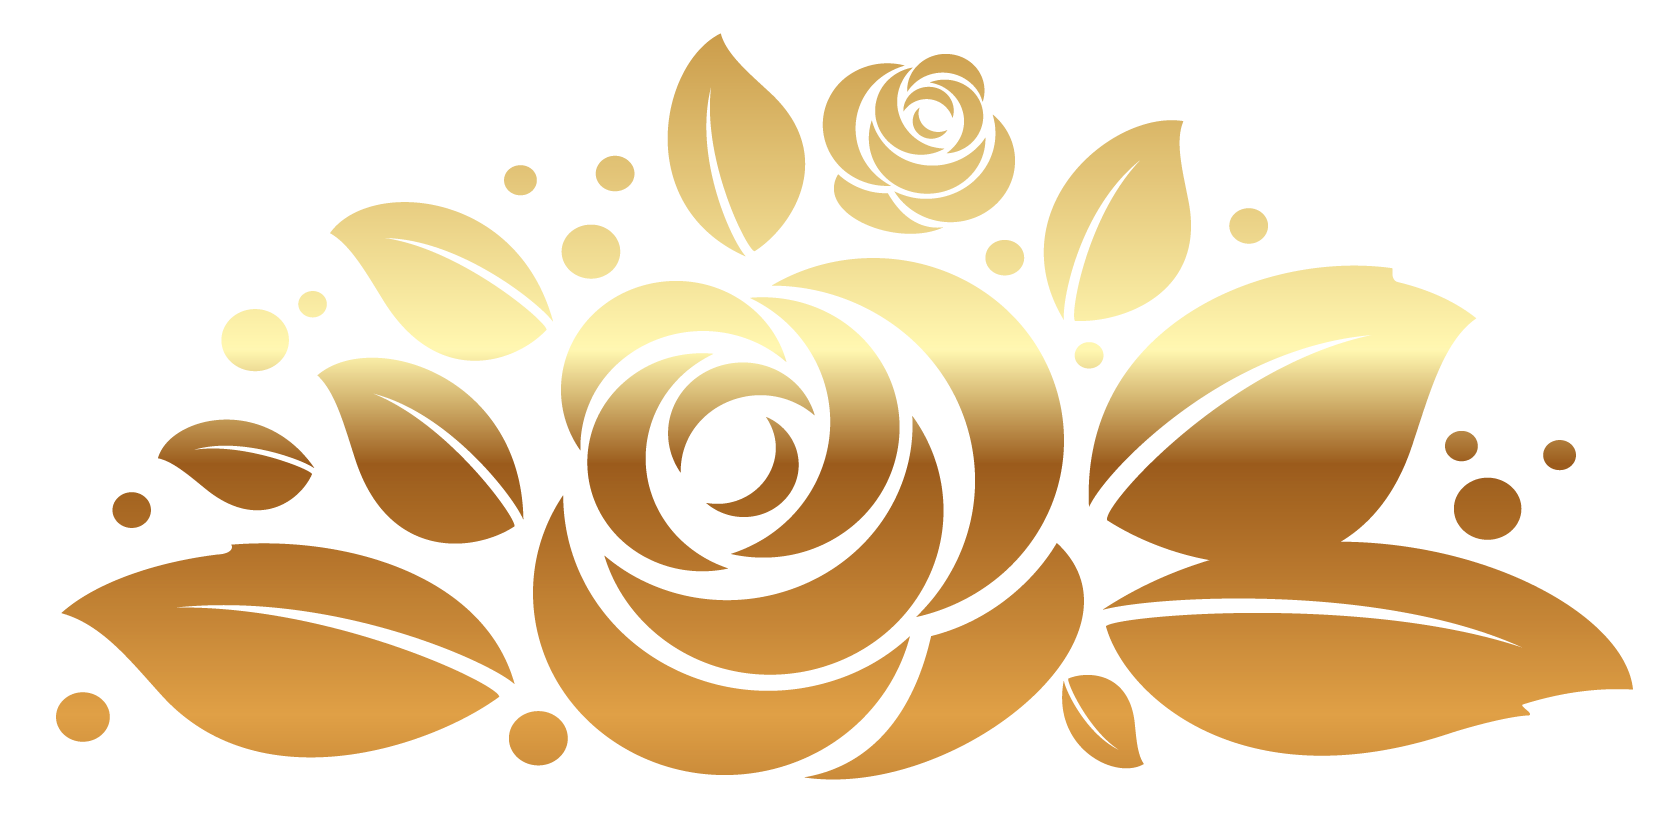 Free Gold Roses Cliparts, Download Free Gold Roses Cliparts png images